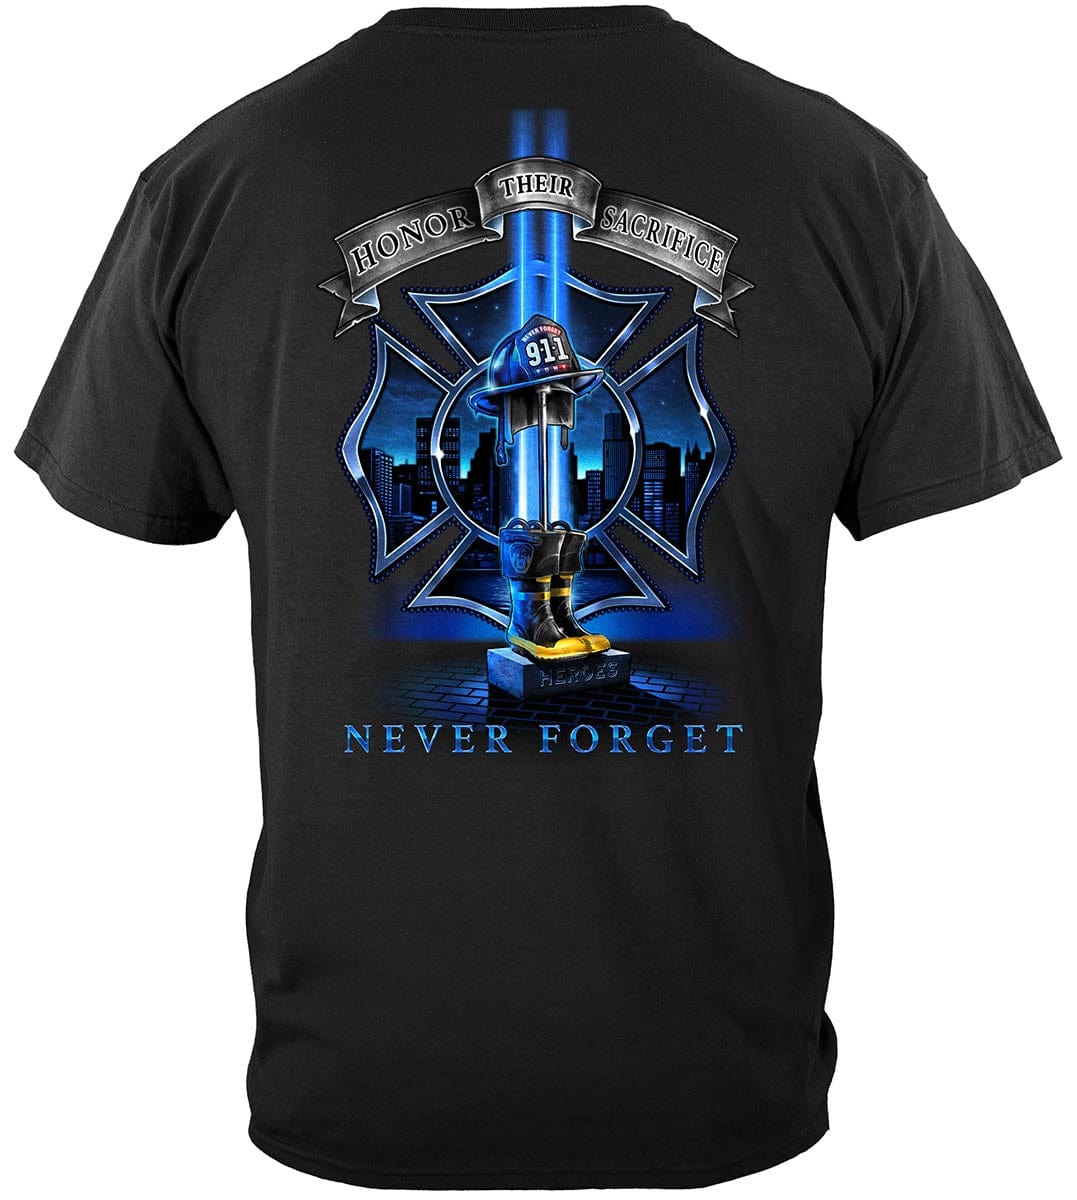 Firefighter 9-11 20 Year Never Forget Soldier Cross T-Shirt